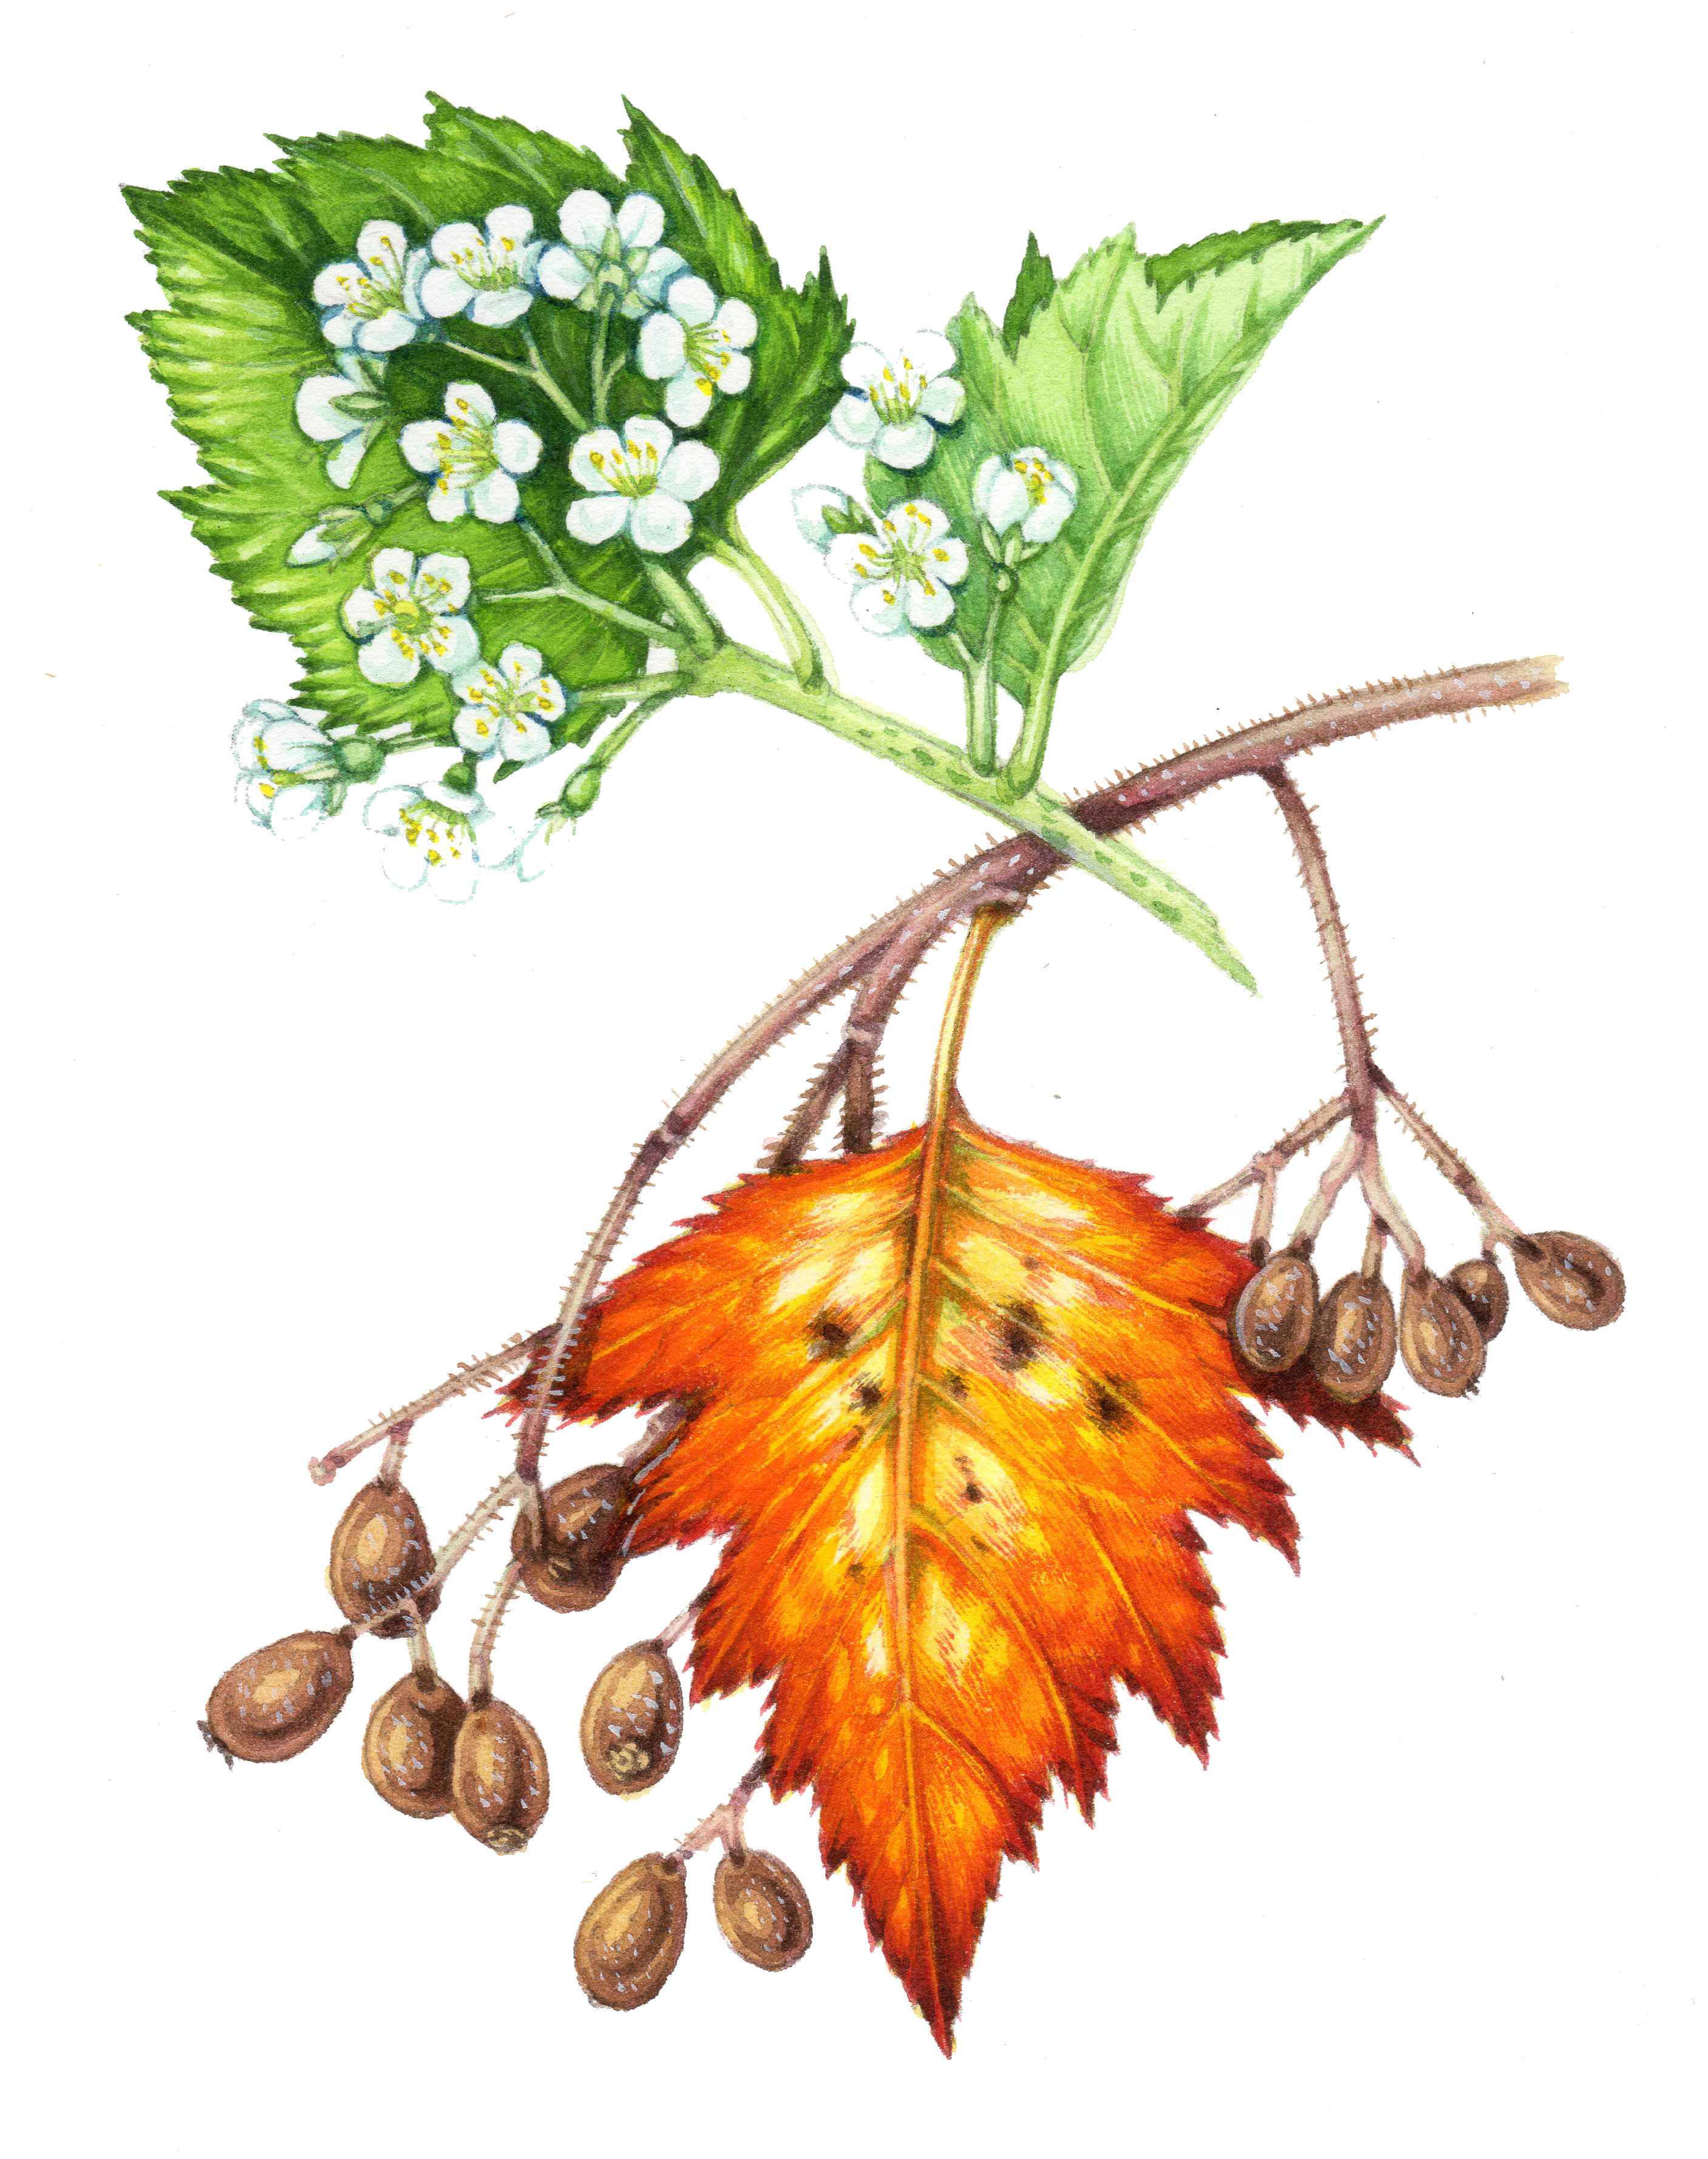 Wild service tree Sorbus torminalis natural history illustration by Lizzie Harper